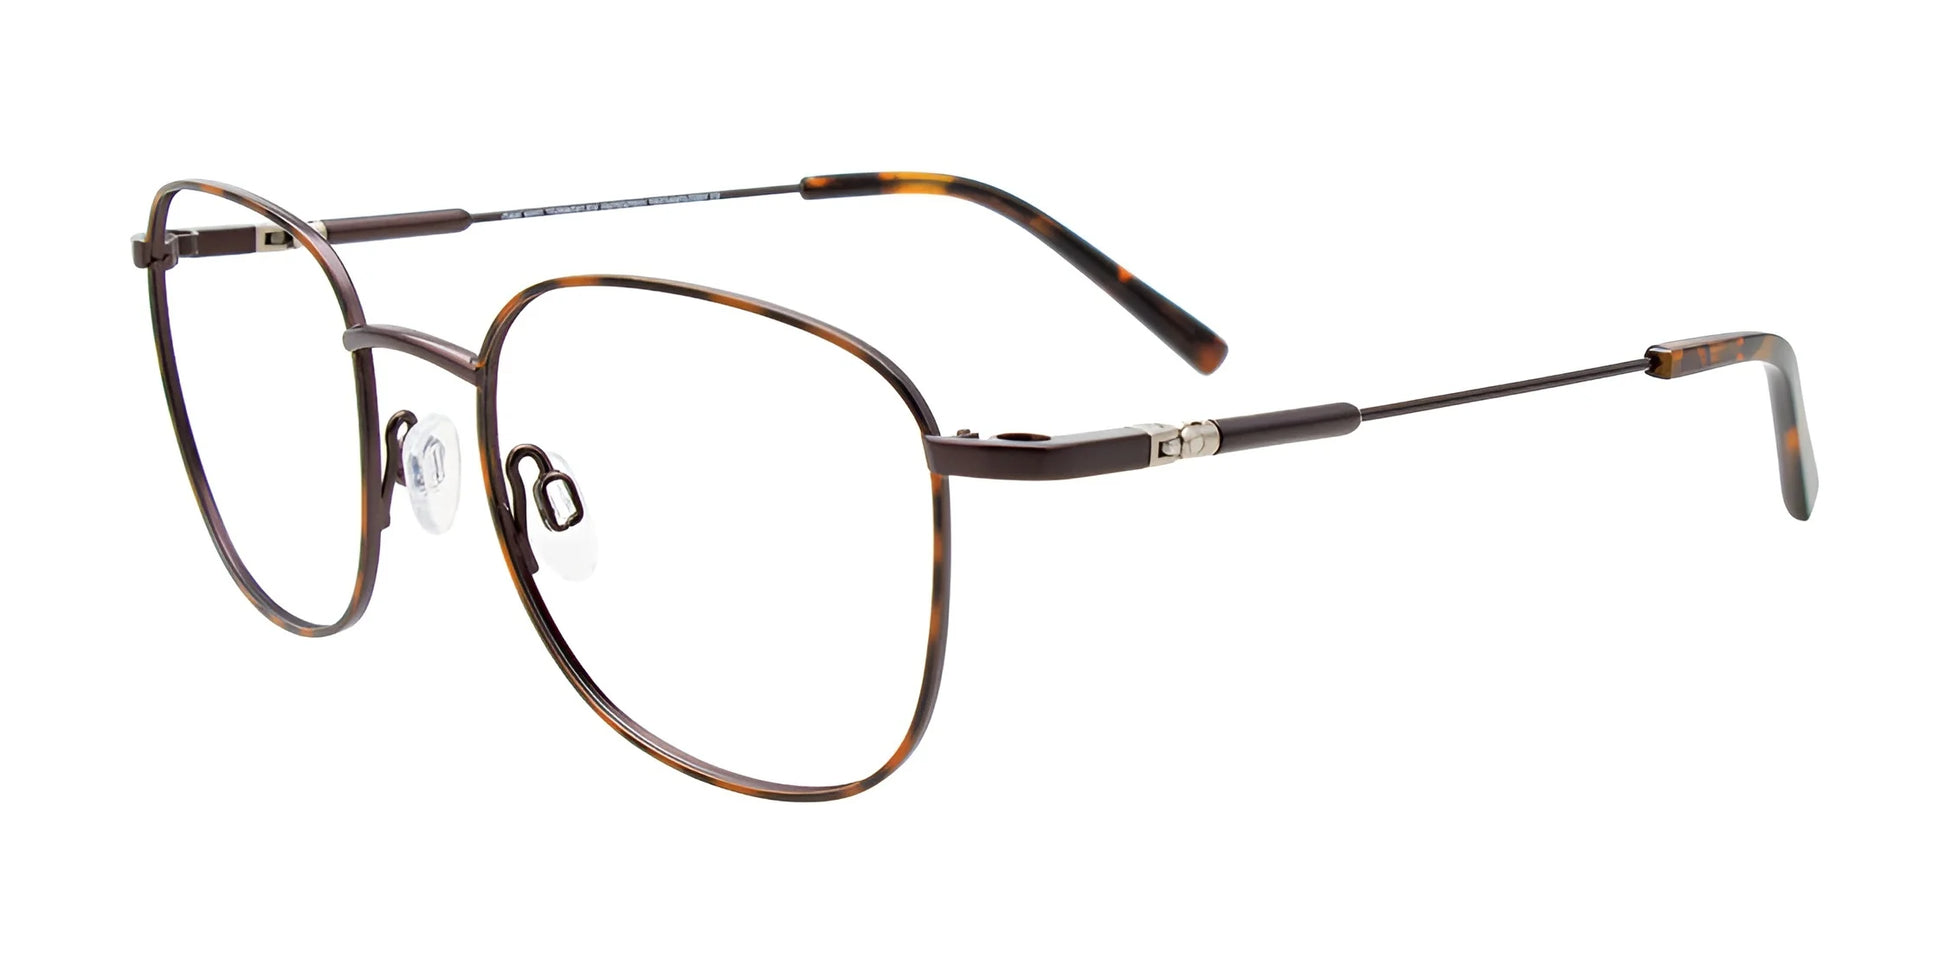 OAK NYC O3021 Eyeglasses with Clip-on Sunglasses Brown Tortoise